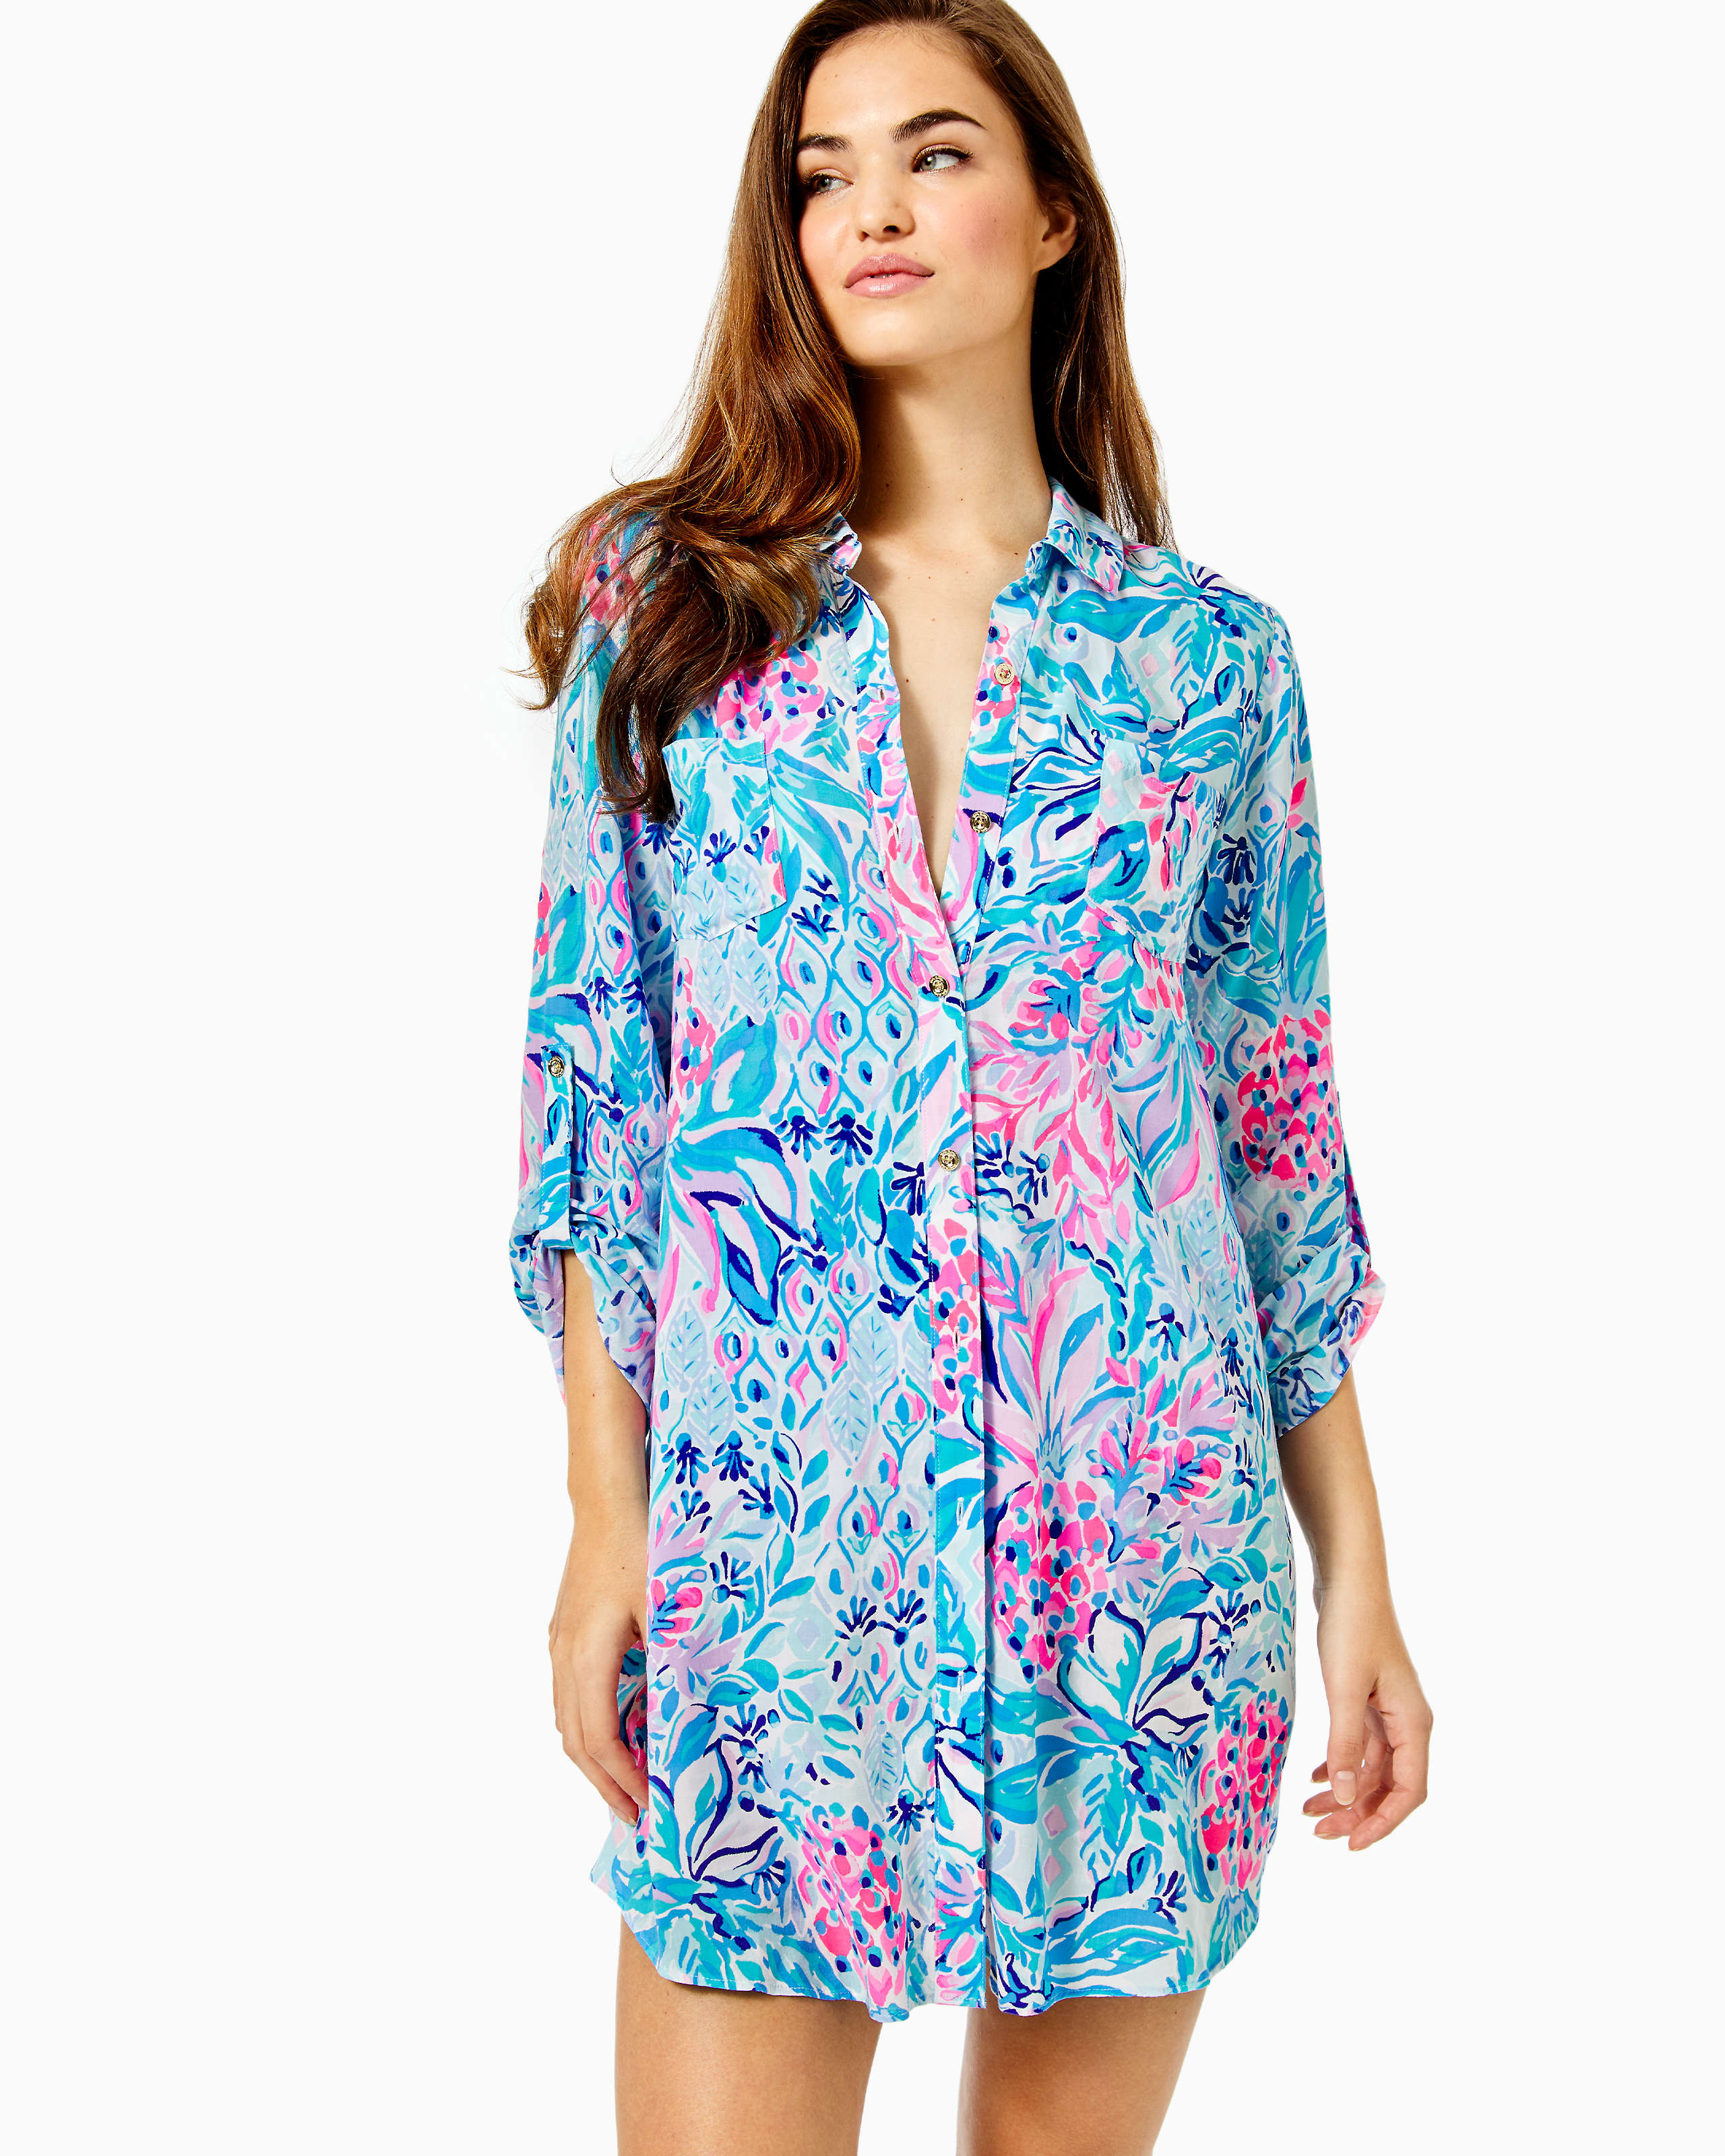 Best Of: Lilly Pulitzer Sale | Kelly in the City | Lifestyle Blog